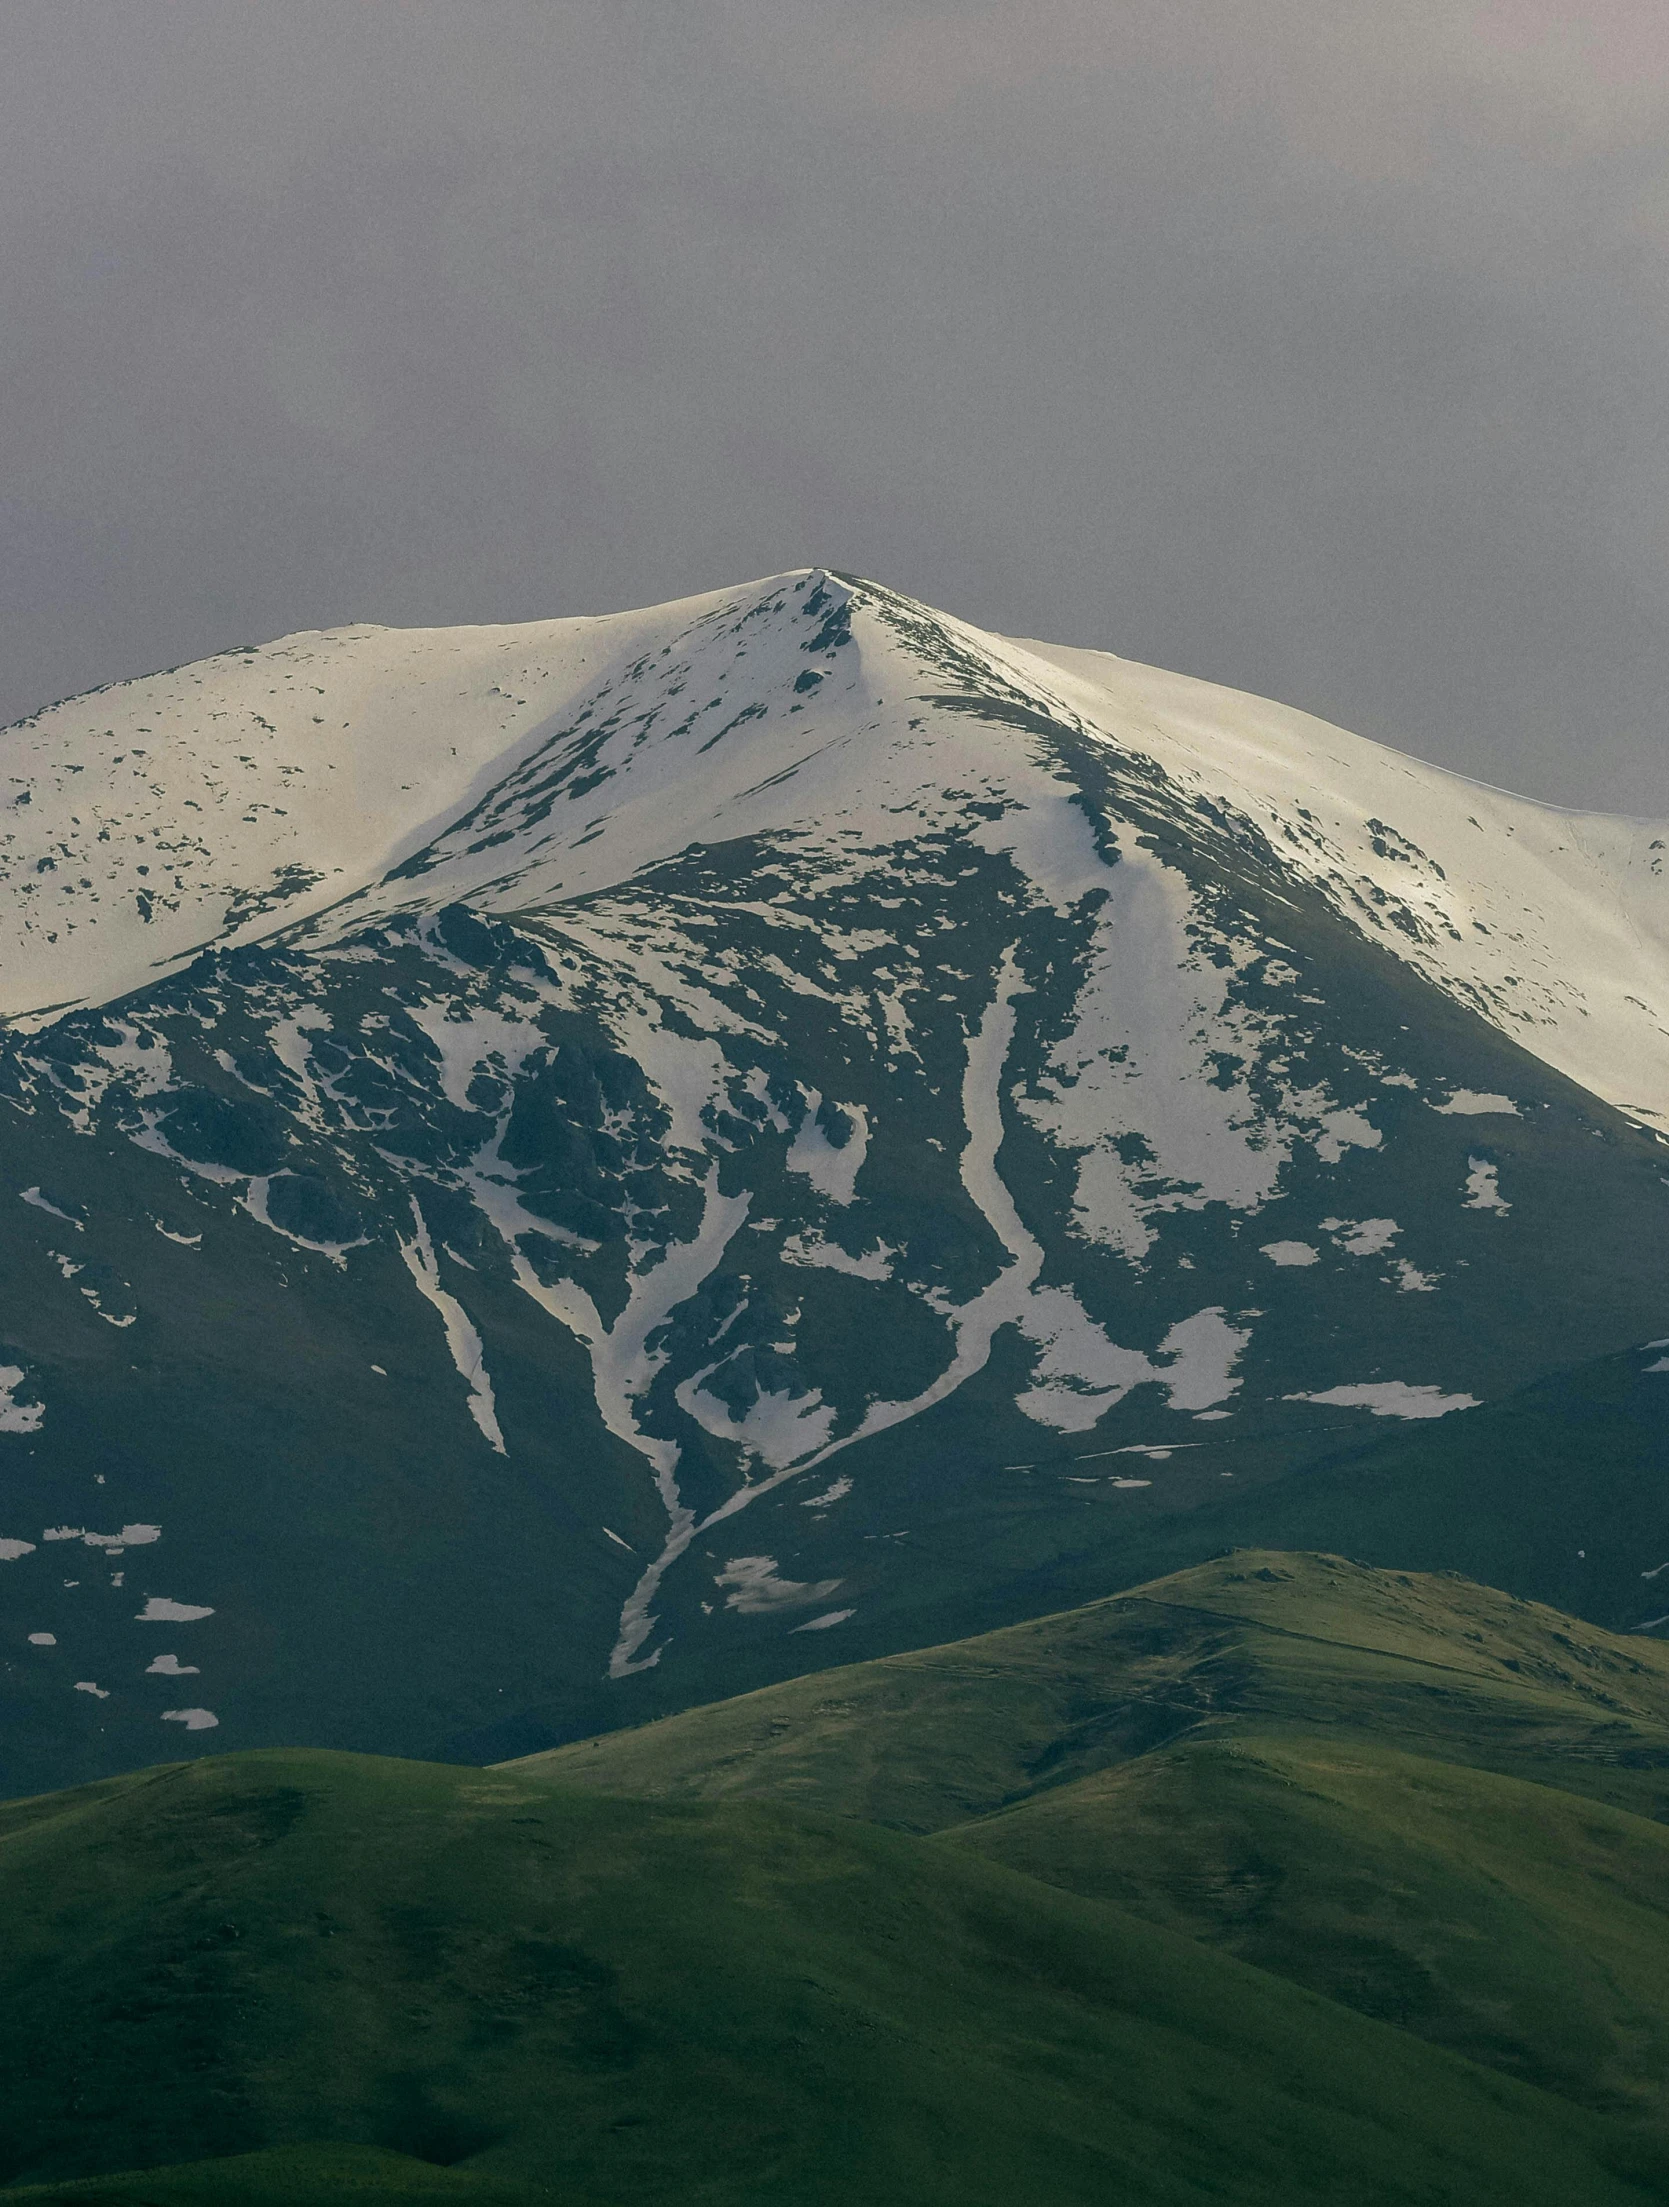 a mountain peak with snow on the top